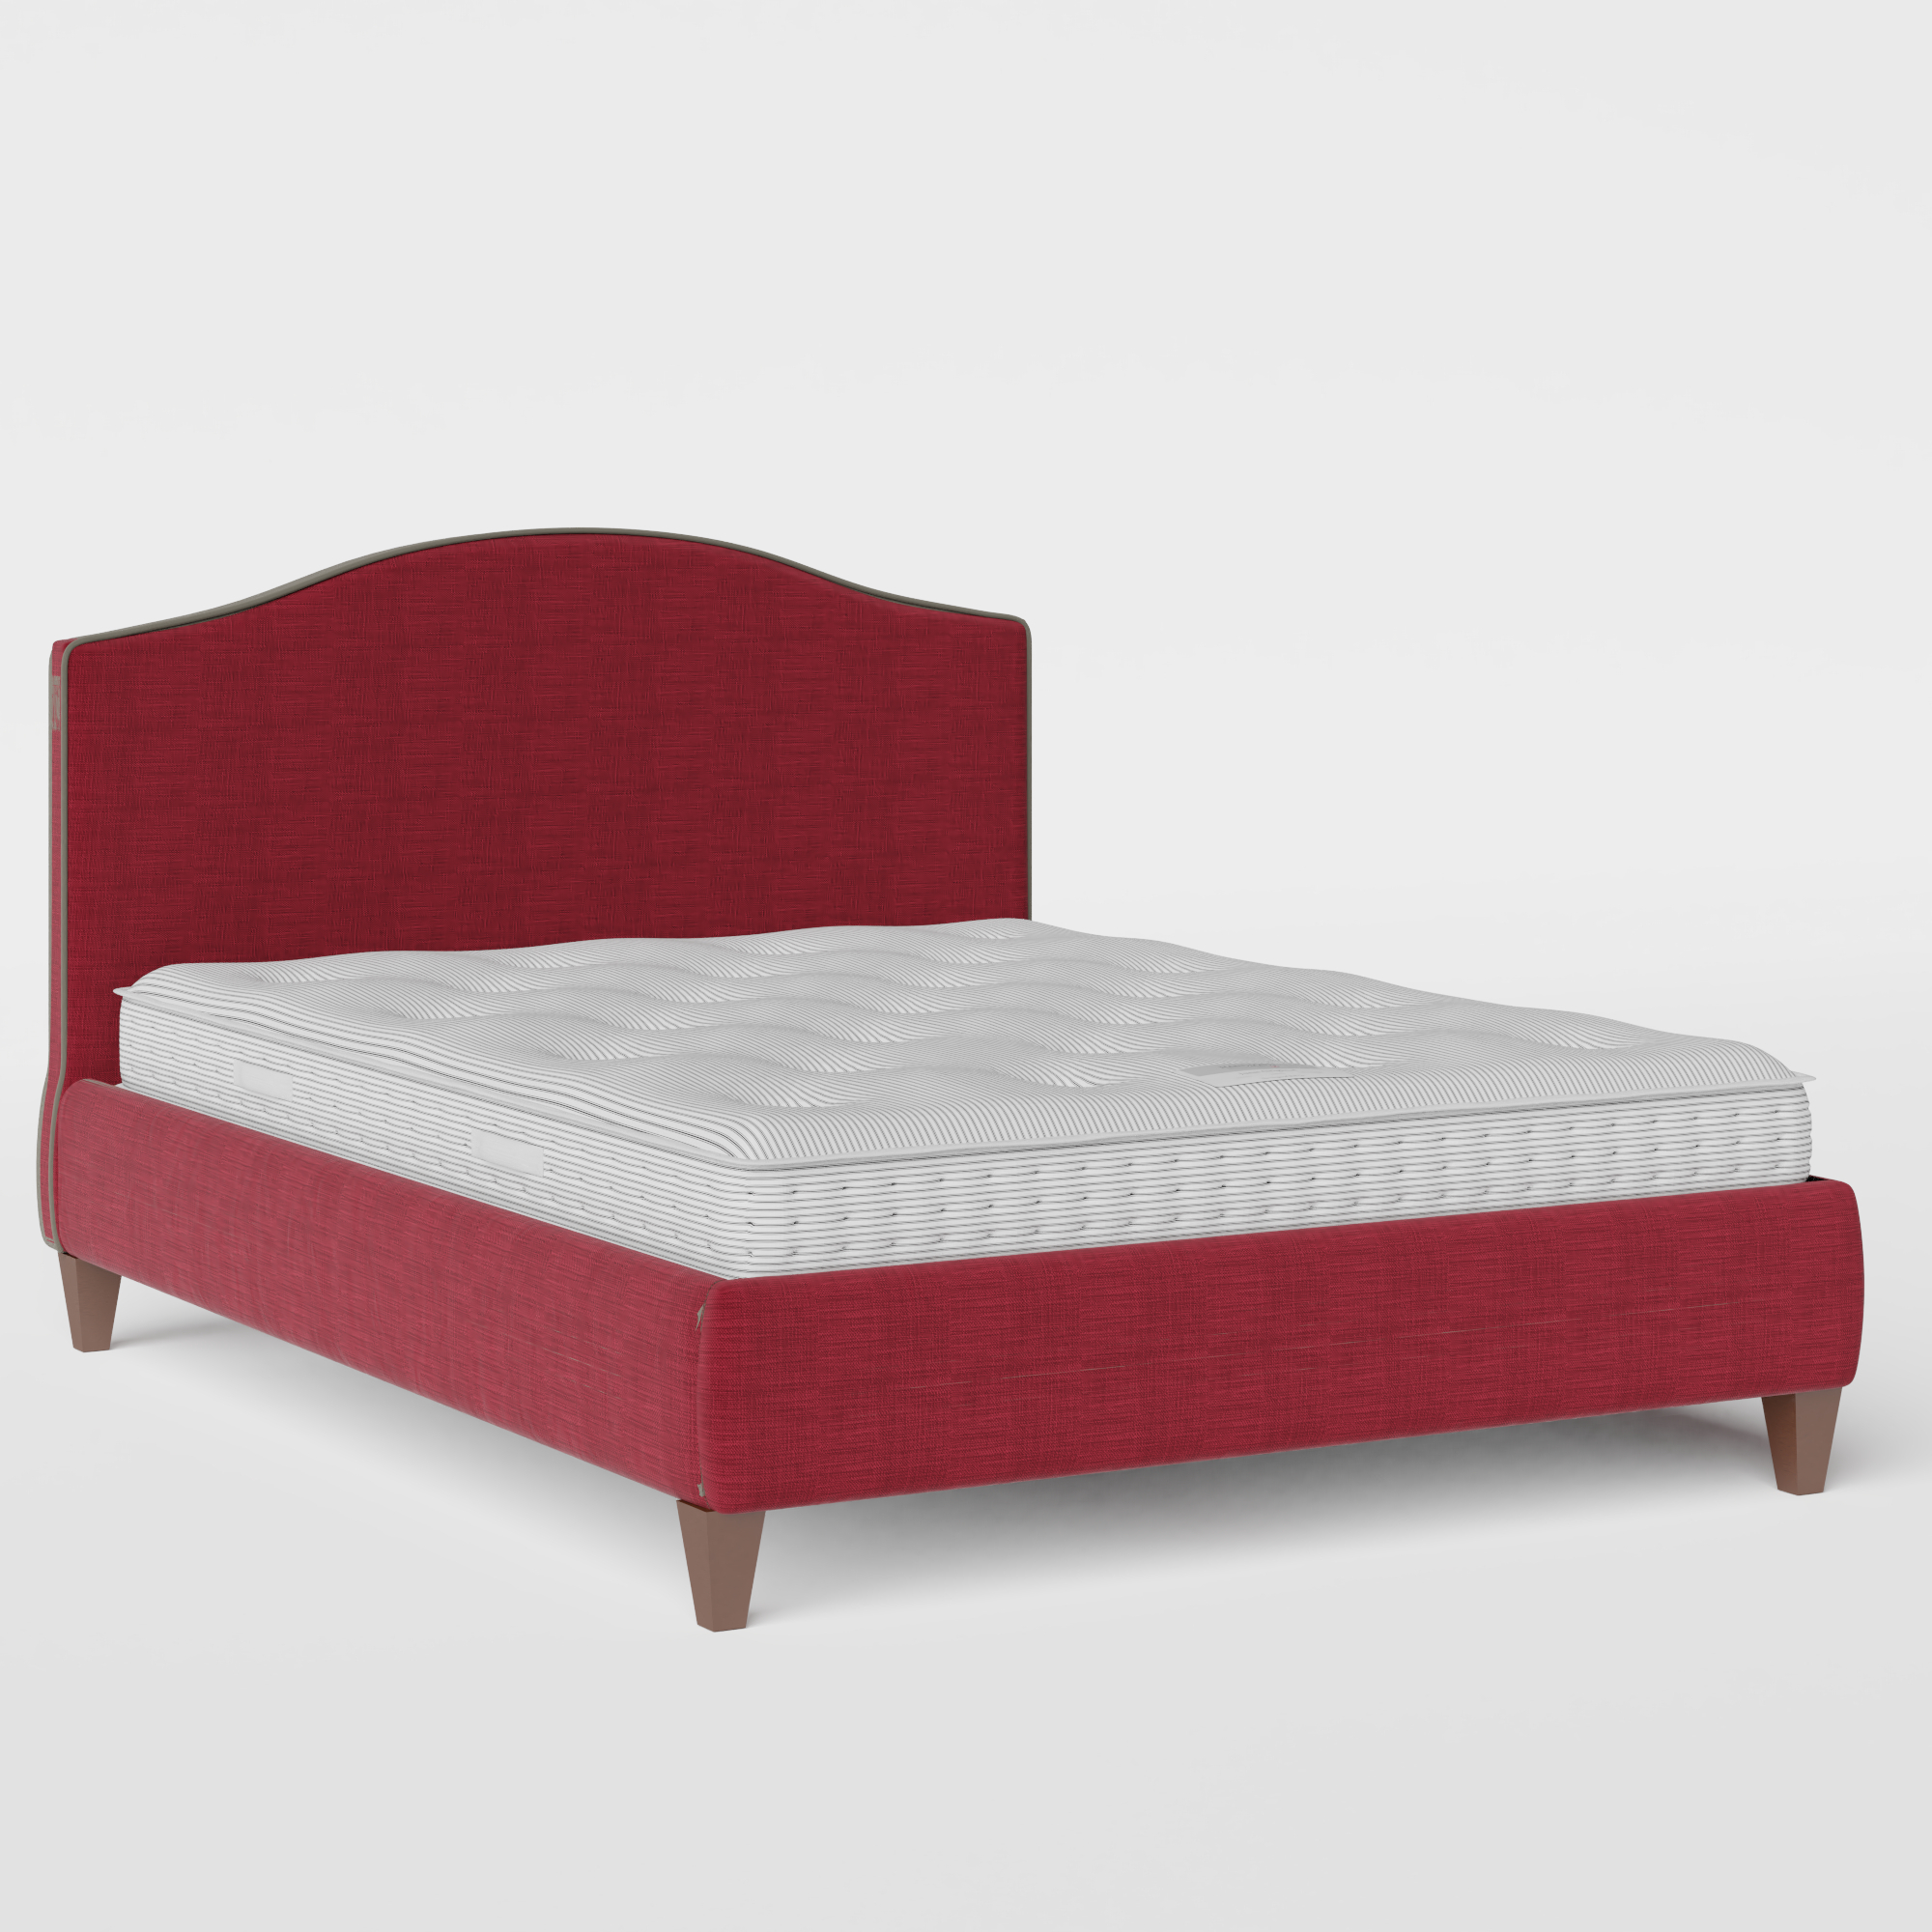 Daniella with Piping stoffen bed in cherry